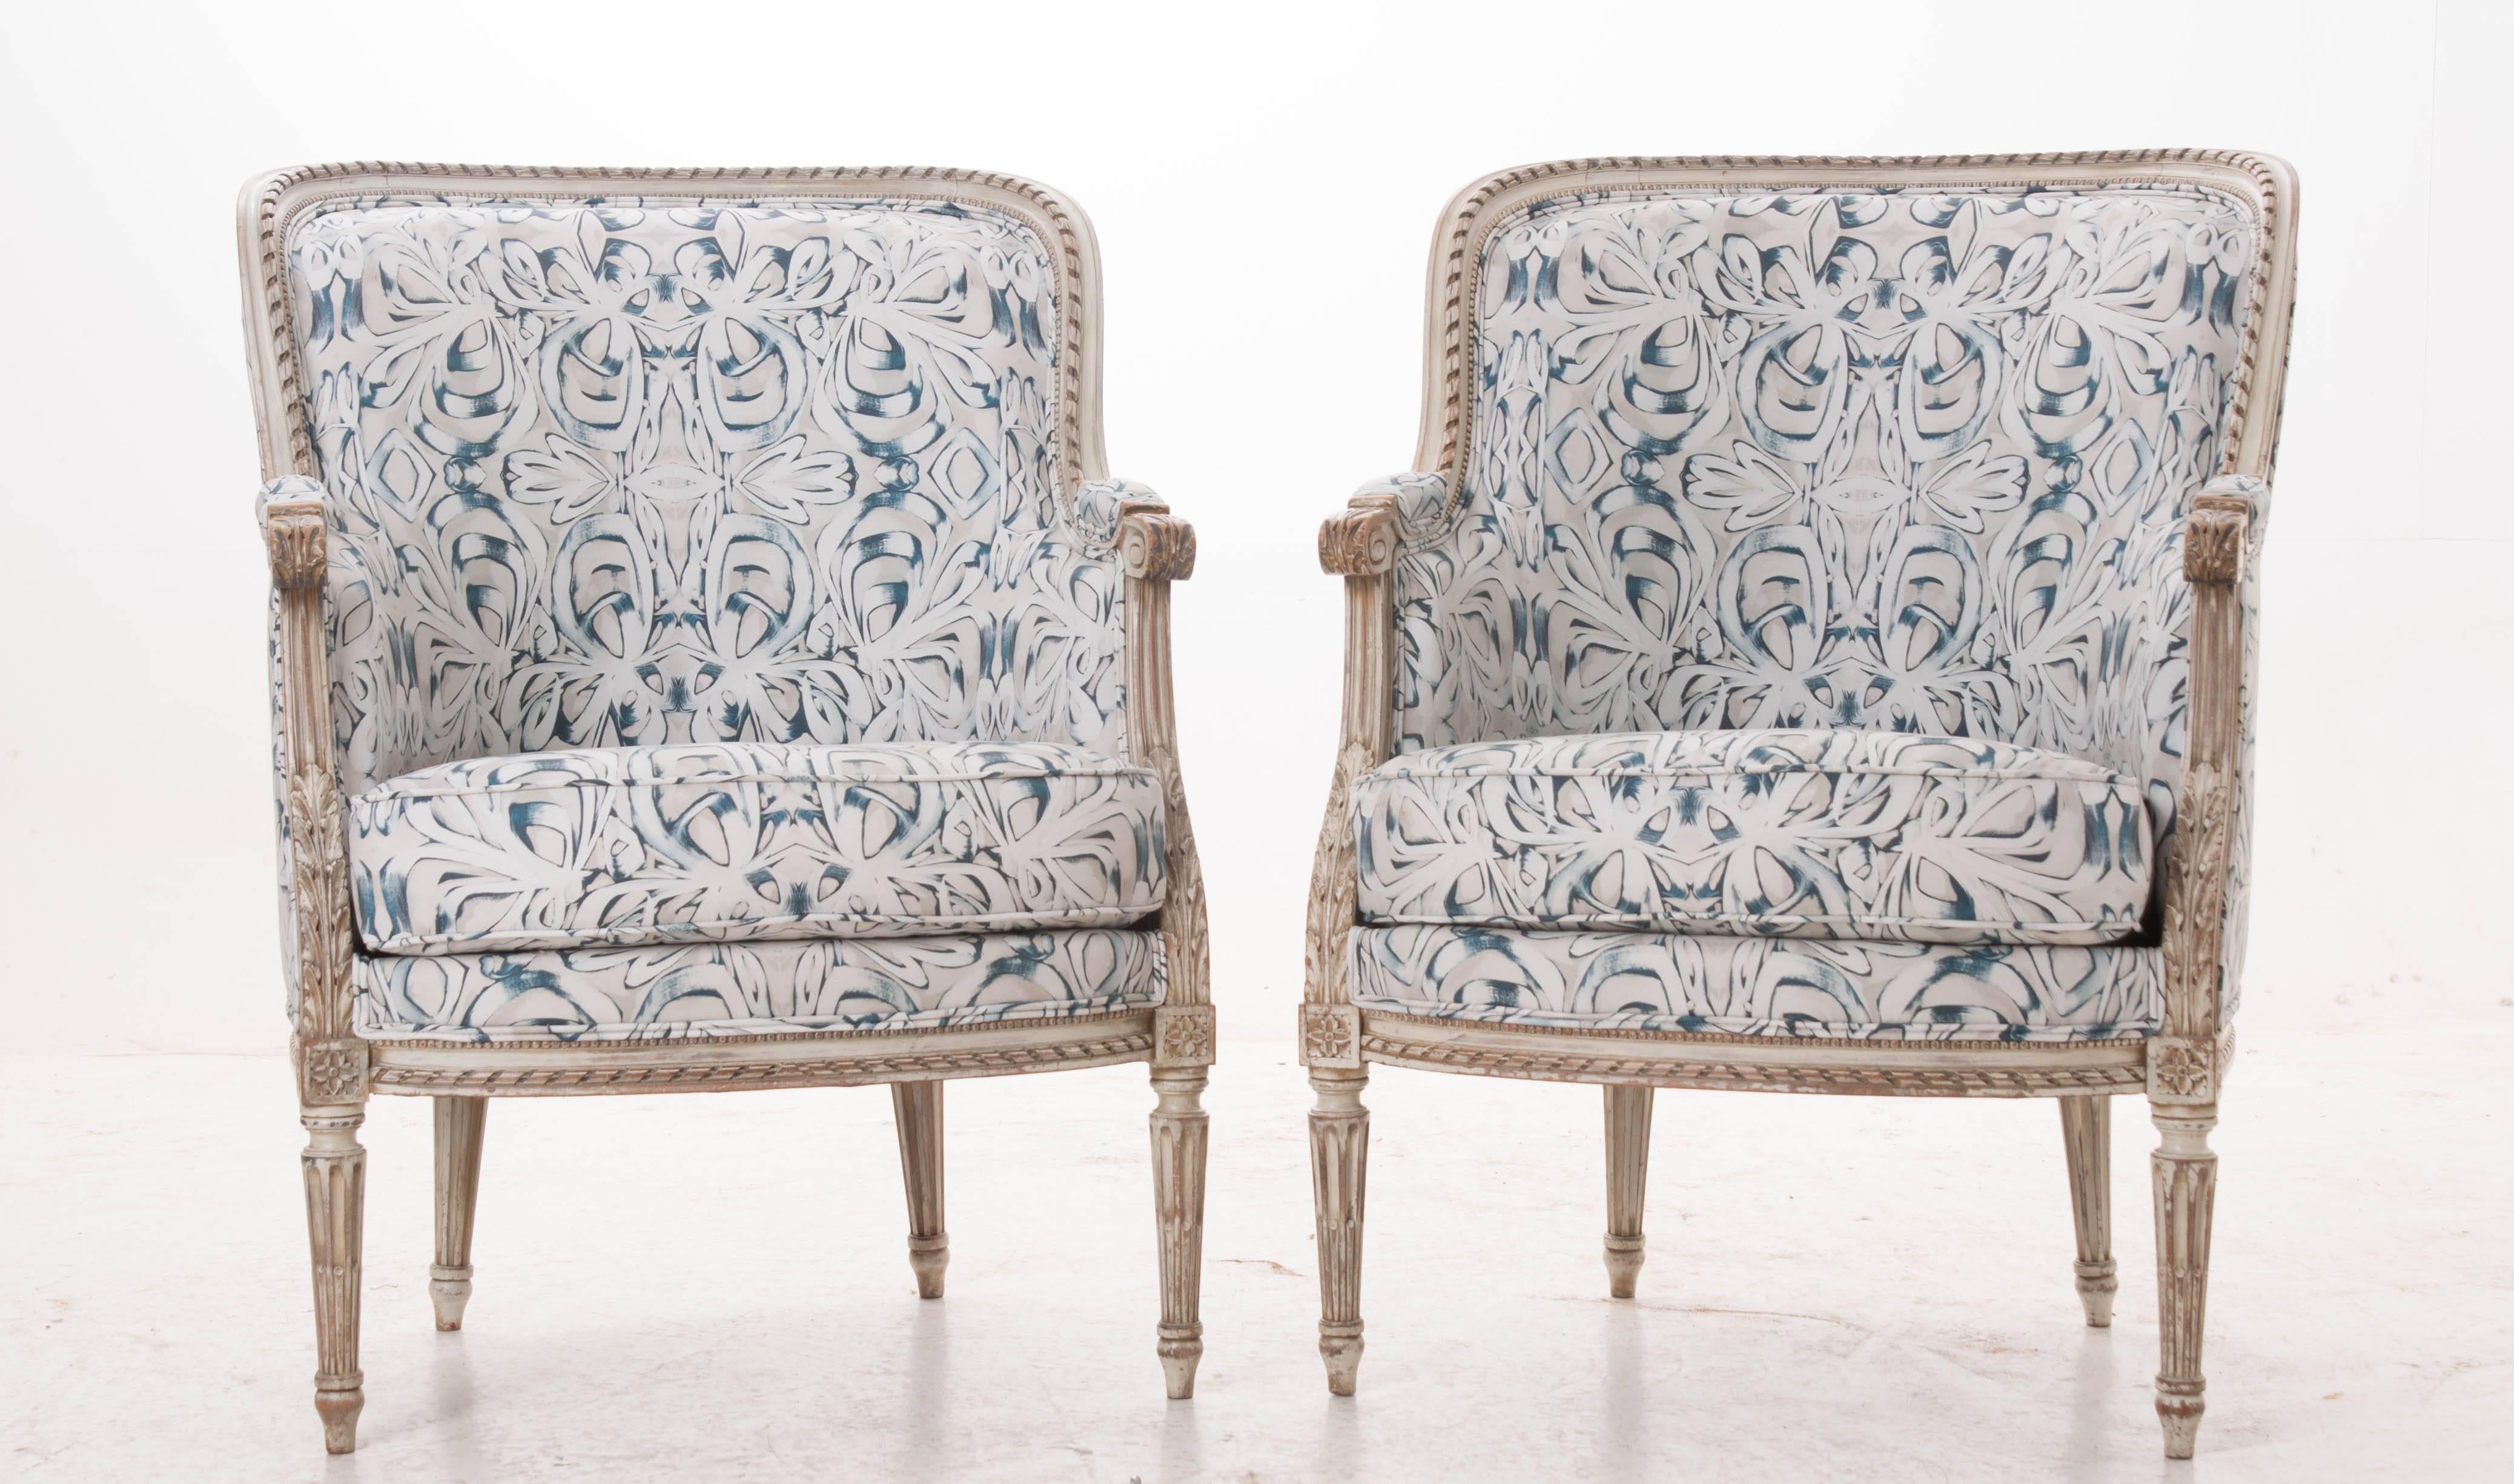 Pair of French barrel back hand-carved and painted bergères upholstered in modern fabric by Amanda Talley of New Orleans, LA. The 'Dungarees' pattern by Talley is the perfect paring for the worn cream paint on the antique chairs. The chairs are